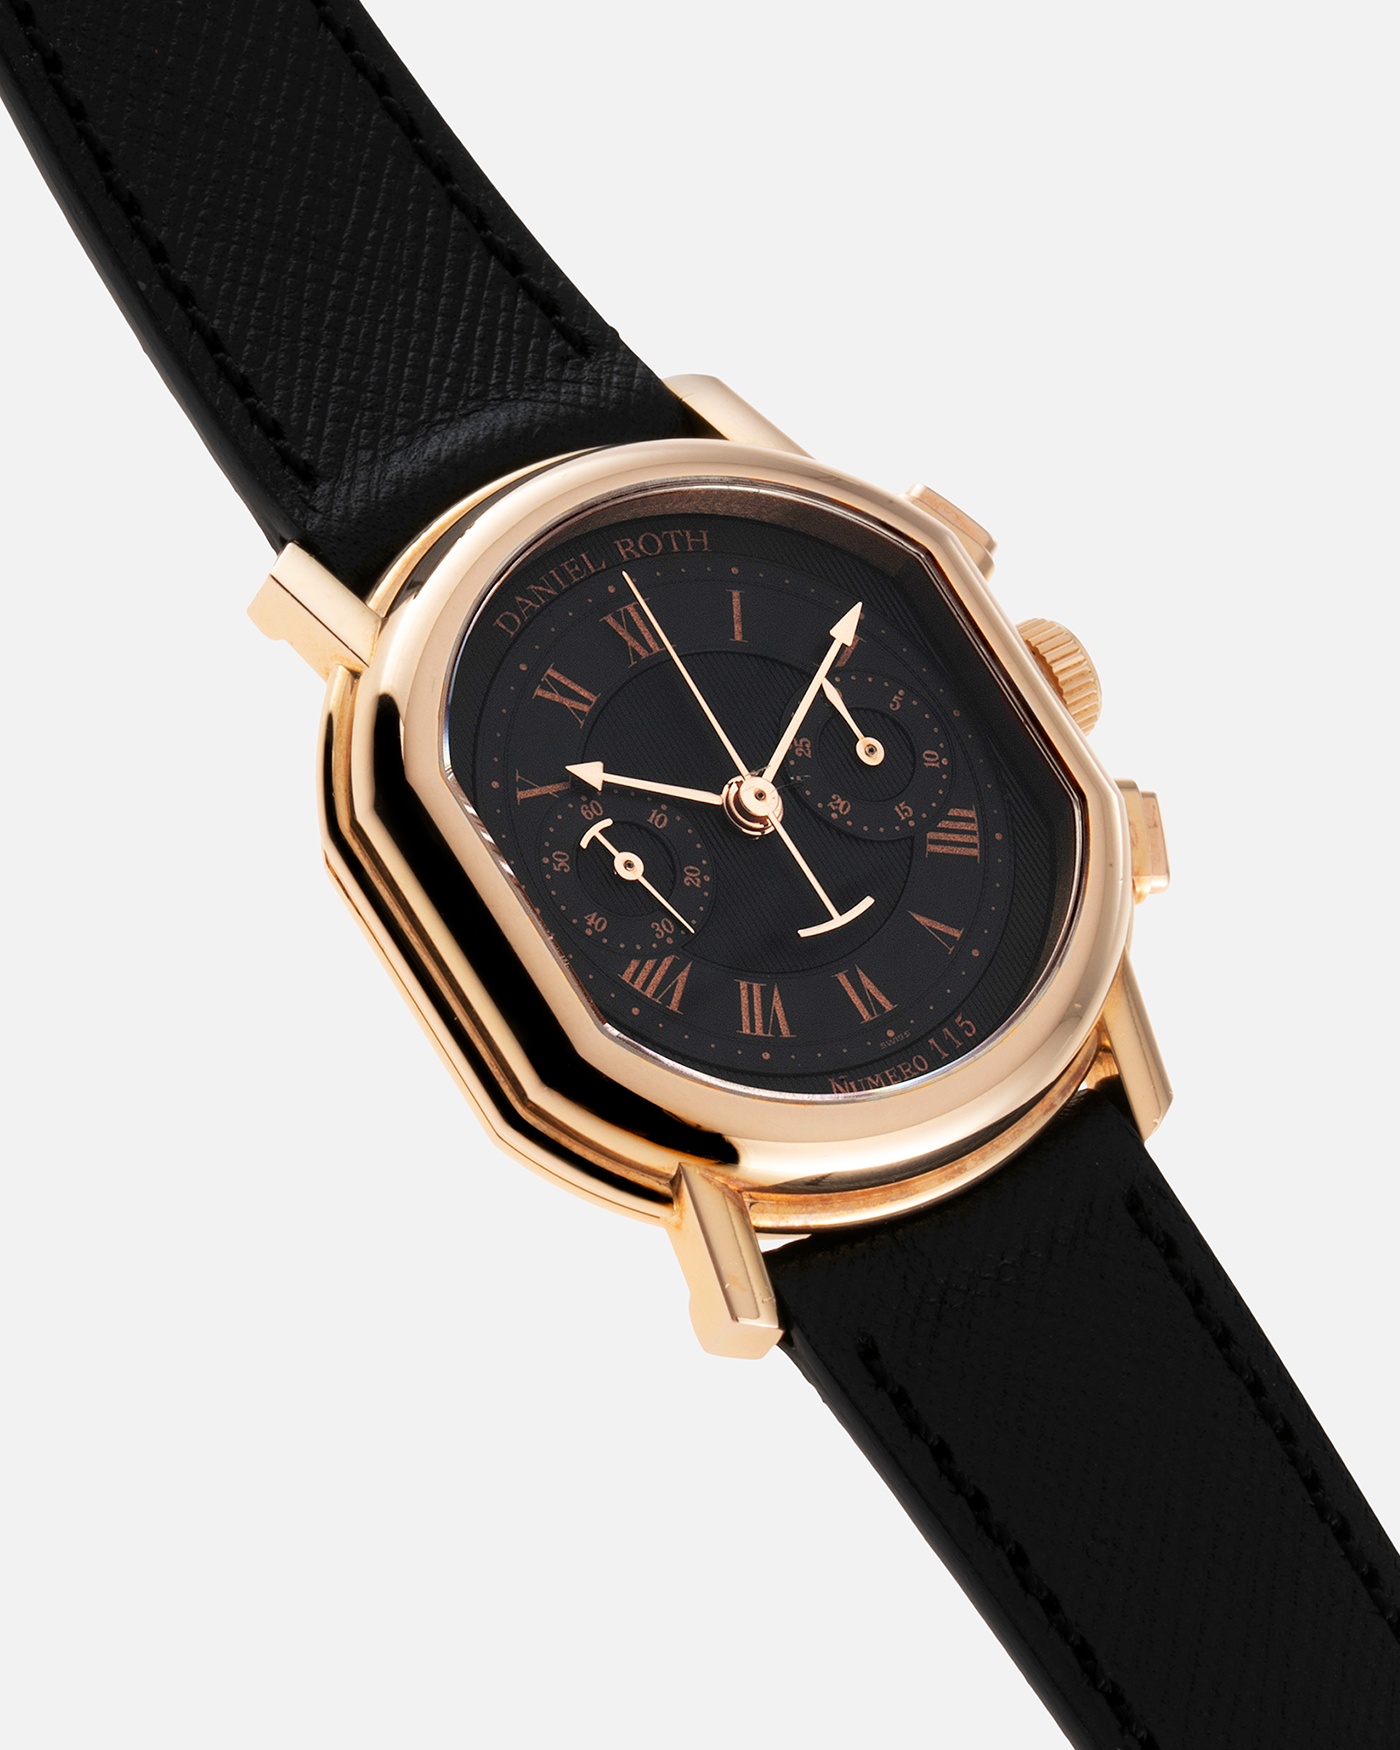 Brand: Daniel Roth Year: 1990’s Model: 2147 Material: 18k Rose Gold Movement: Lemania 2320 Case Diameter: 35mm X 38mm Strap: Molequin Black Textured Calf Leather and Gold Plated Tang Buckle